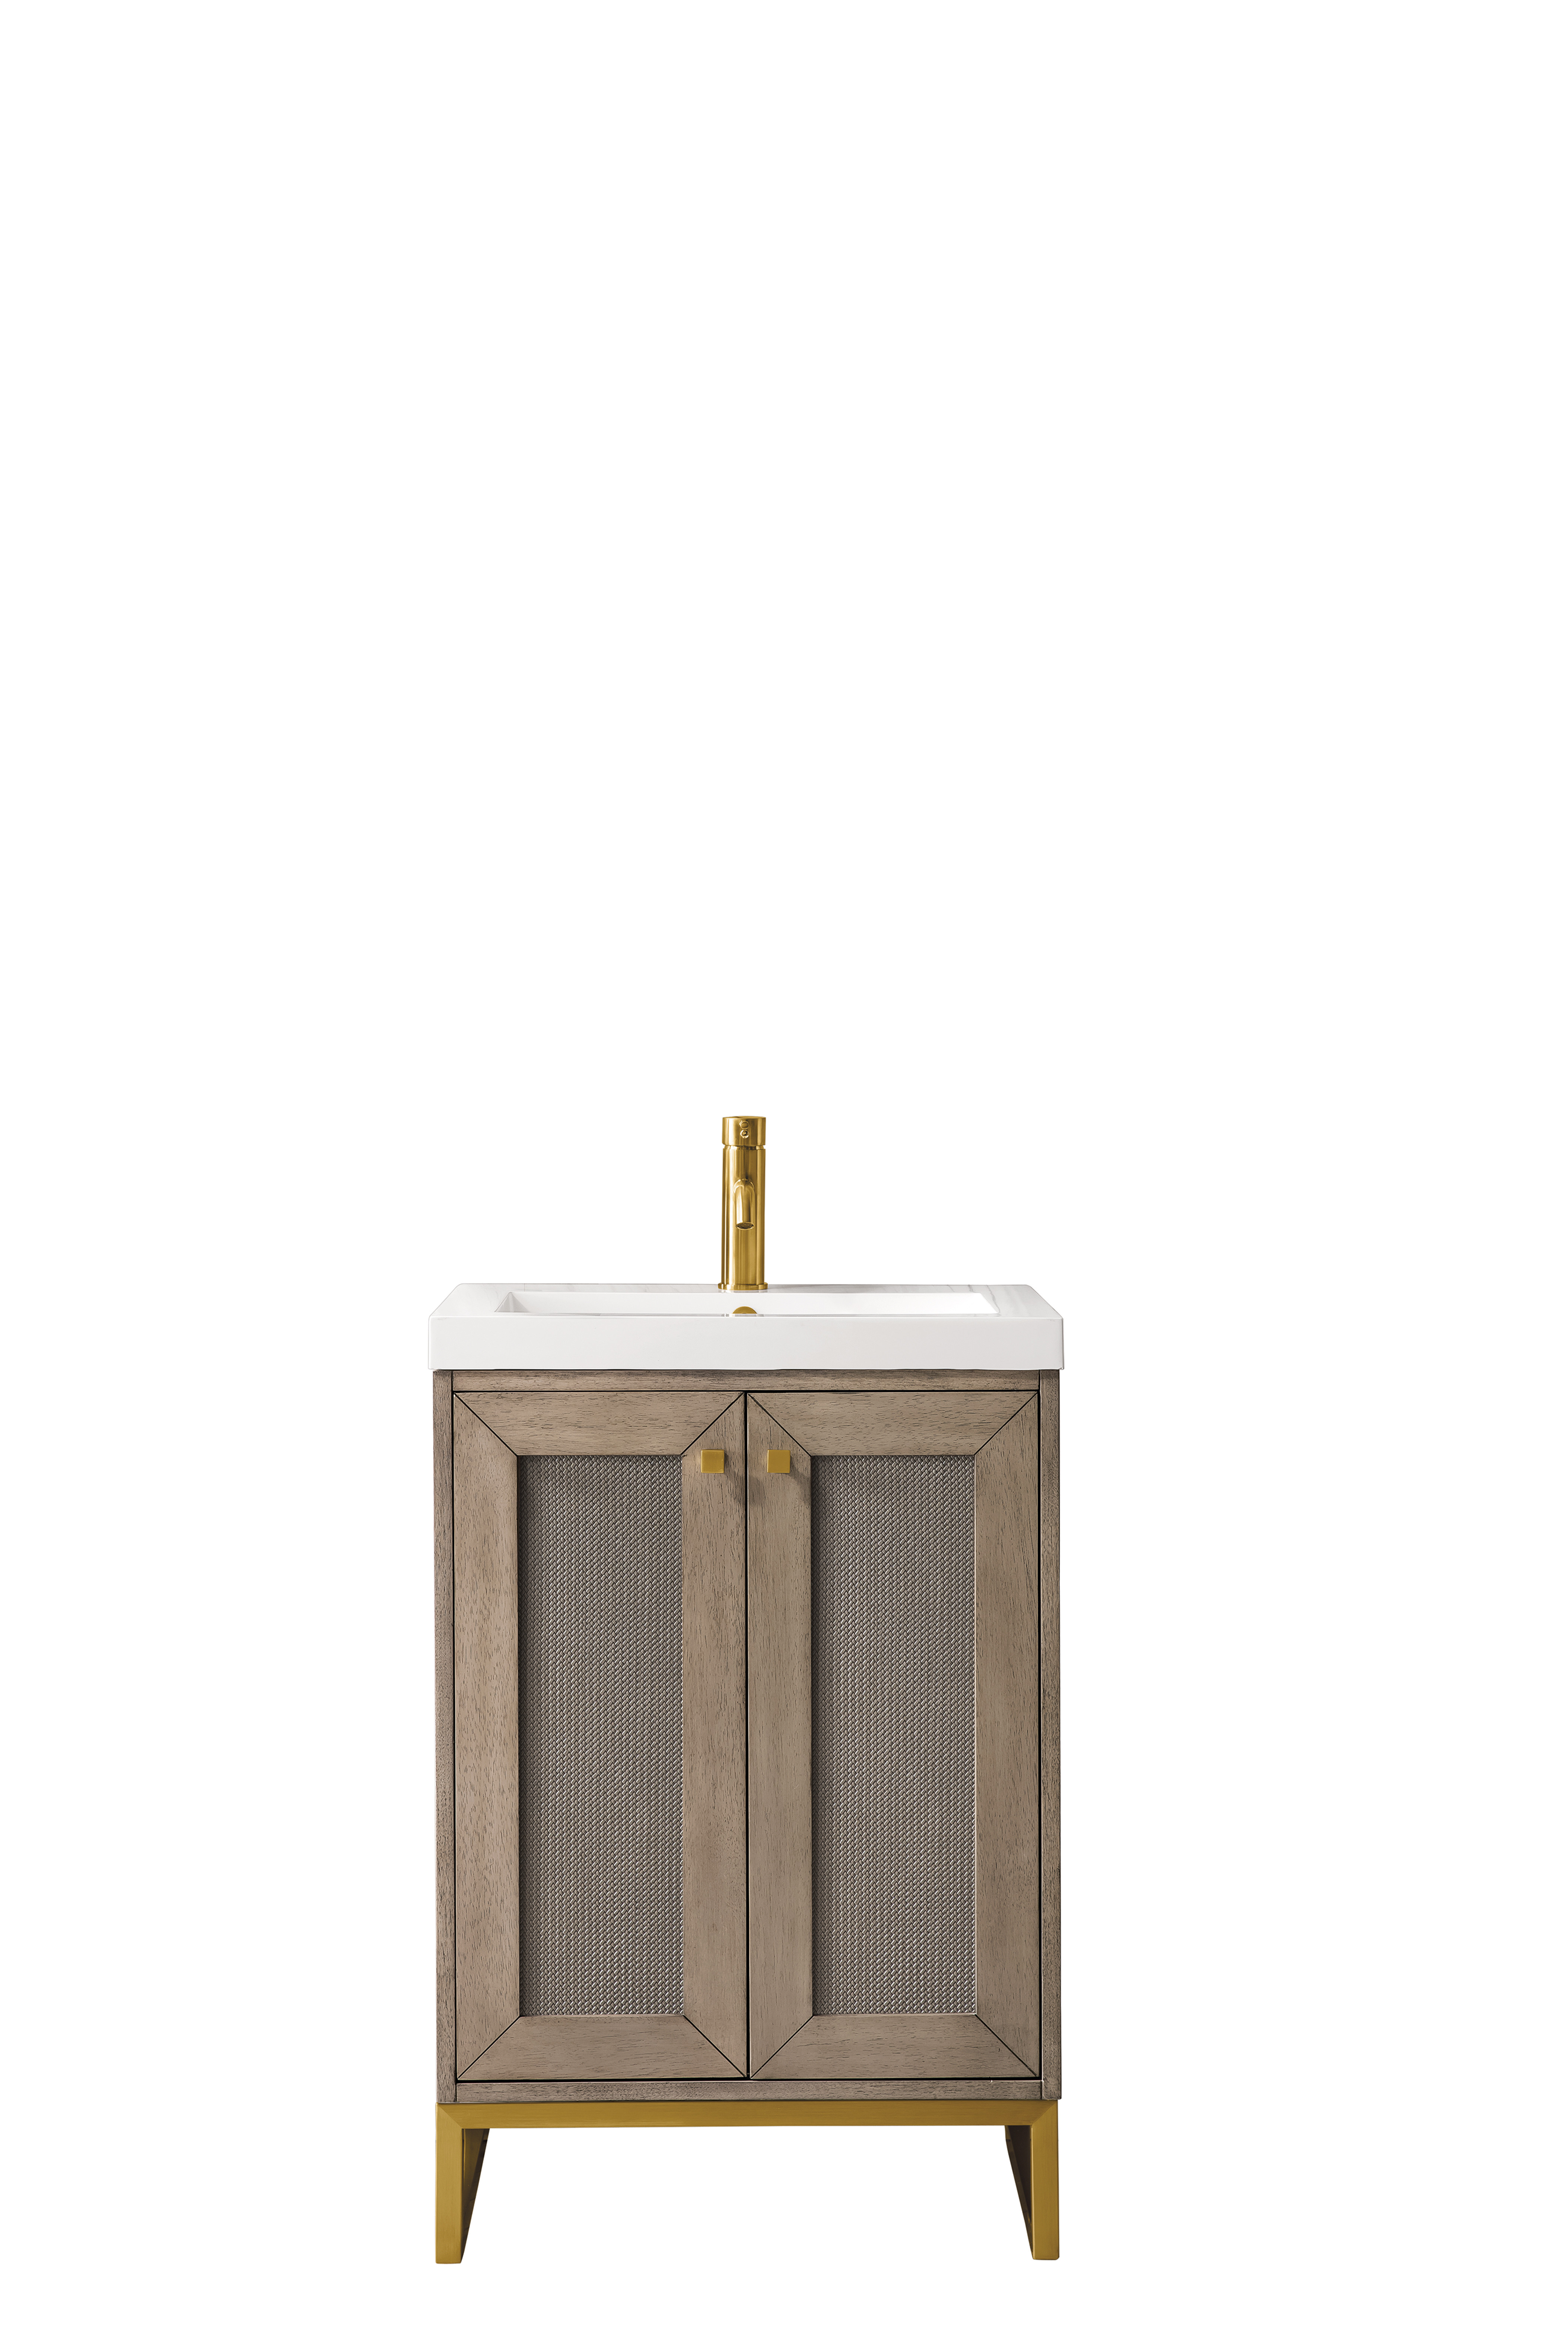 James Martin Chianti 24 Single Bathroom Vanity in Glossy White and Radiant  Gold with 3.5 cm White Glossy Resin Top and Rectangular Sink